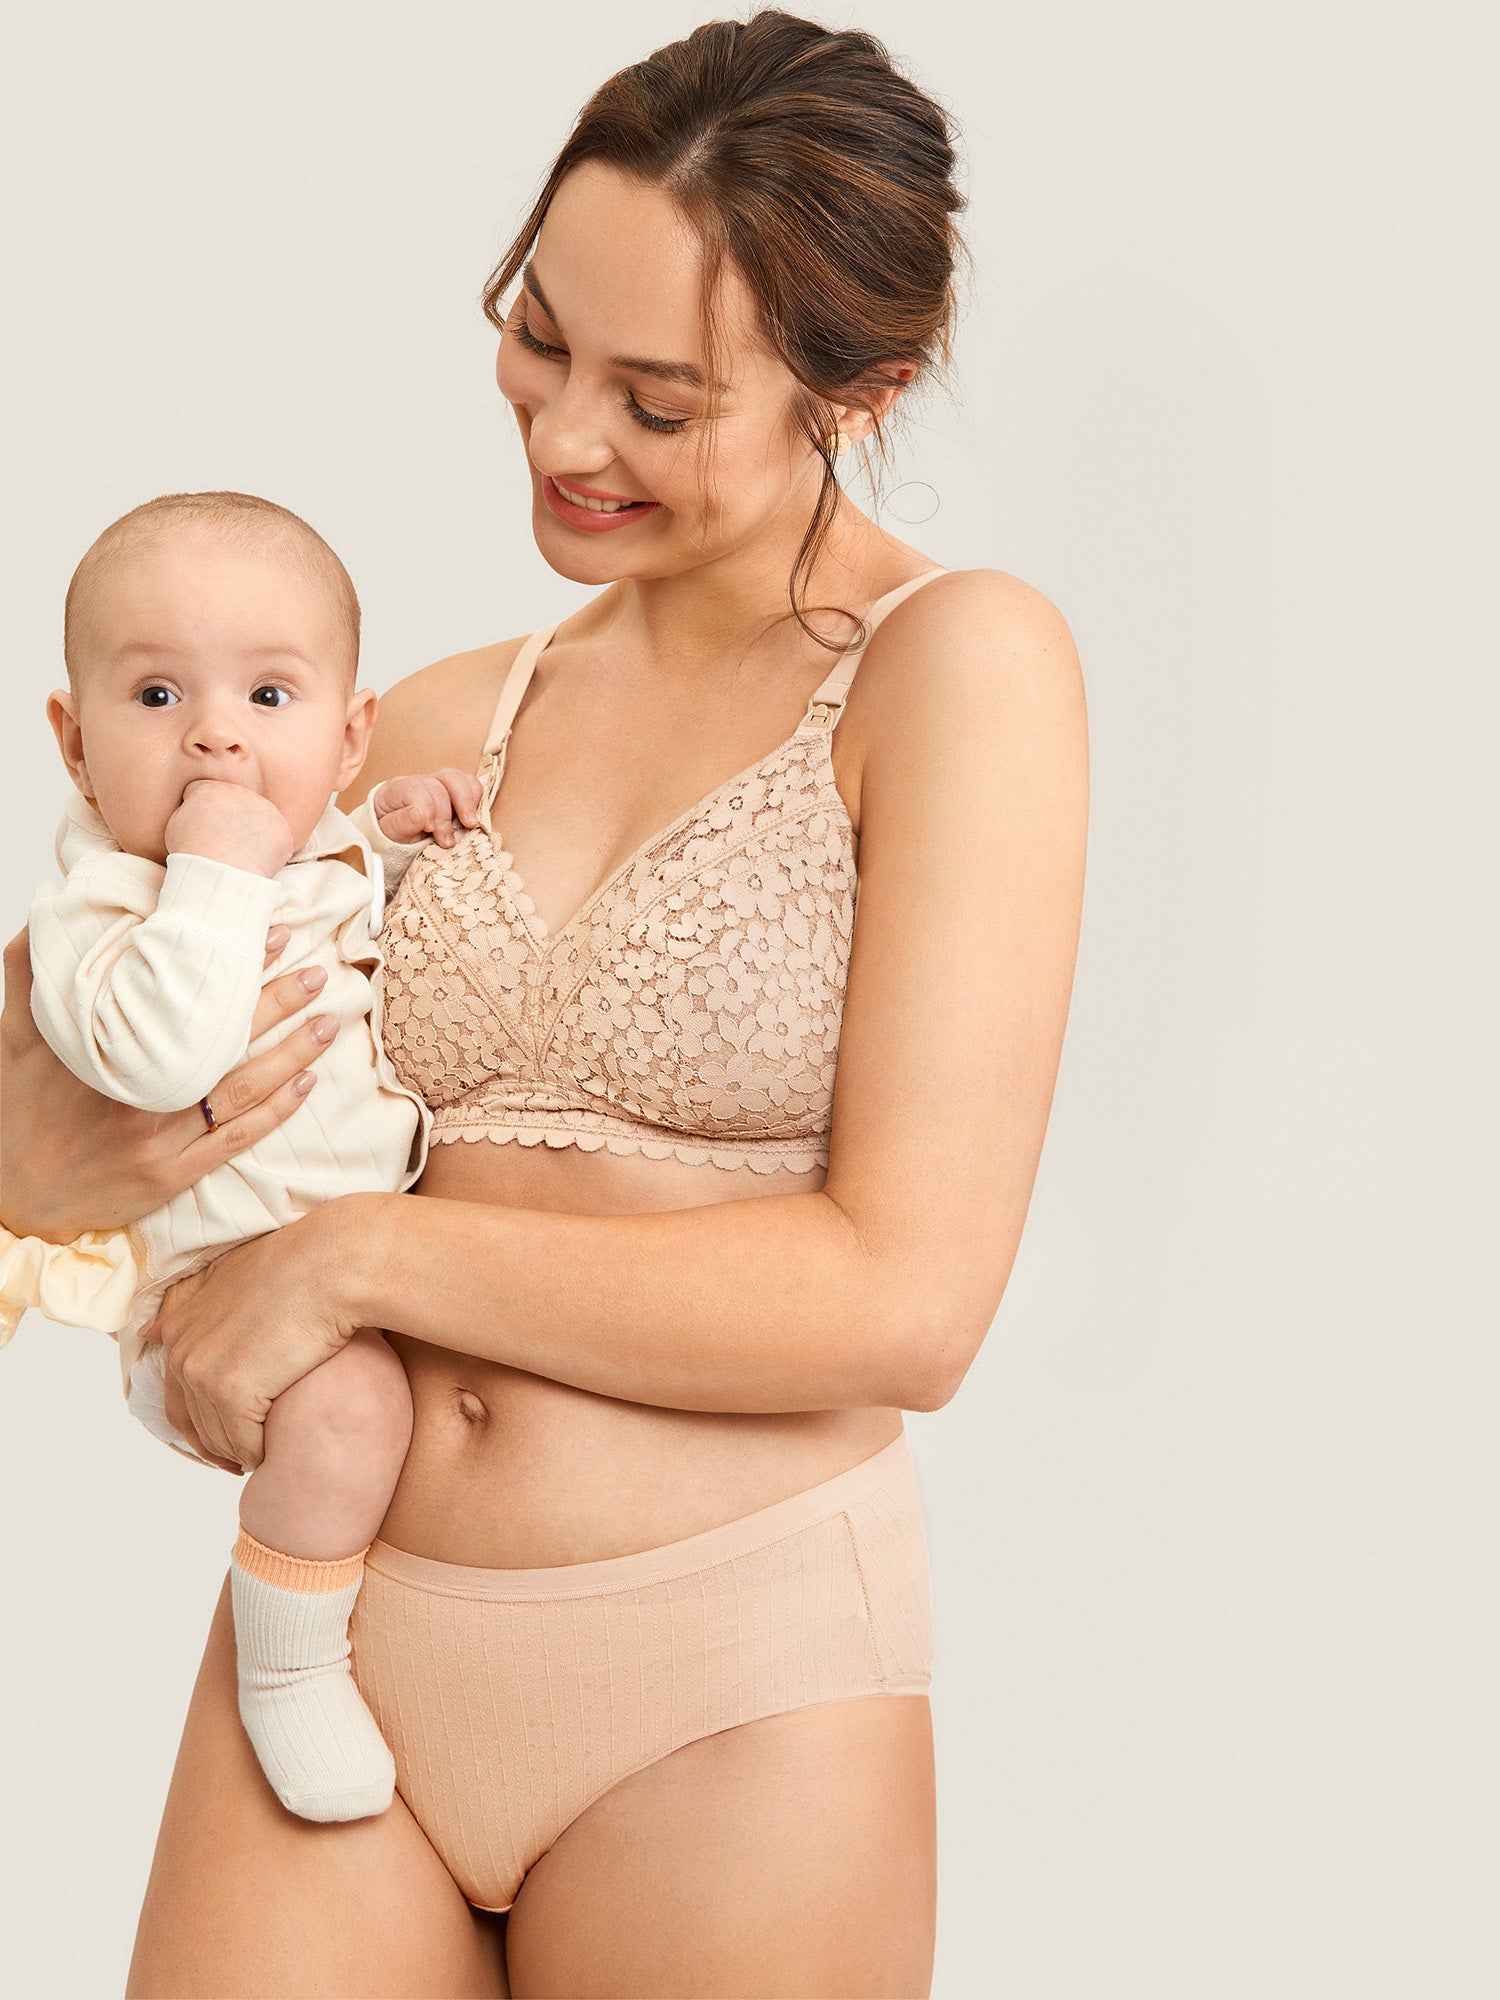 MOMANDA Cotton Hands Free Pumping Longline Bra Set For Nursing,  Breastfeeding, And Sleep Wireless Crossover Maternity Lingerie With Soft  XSL Fabric 230927 From Bong08, $16.5